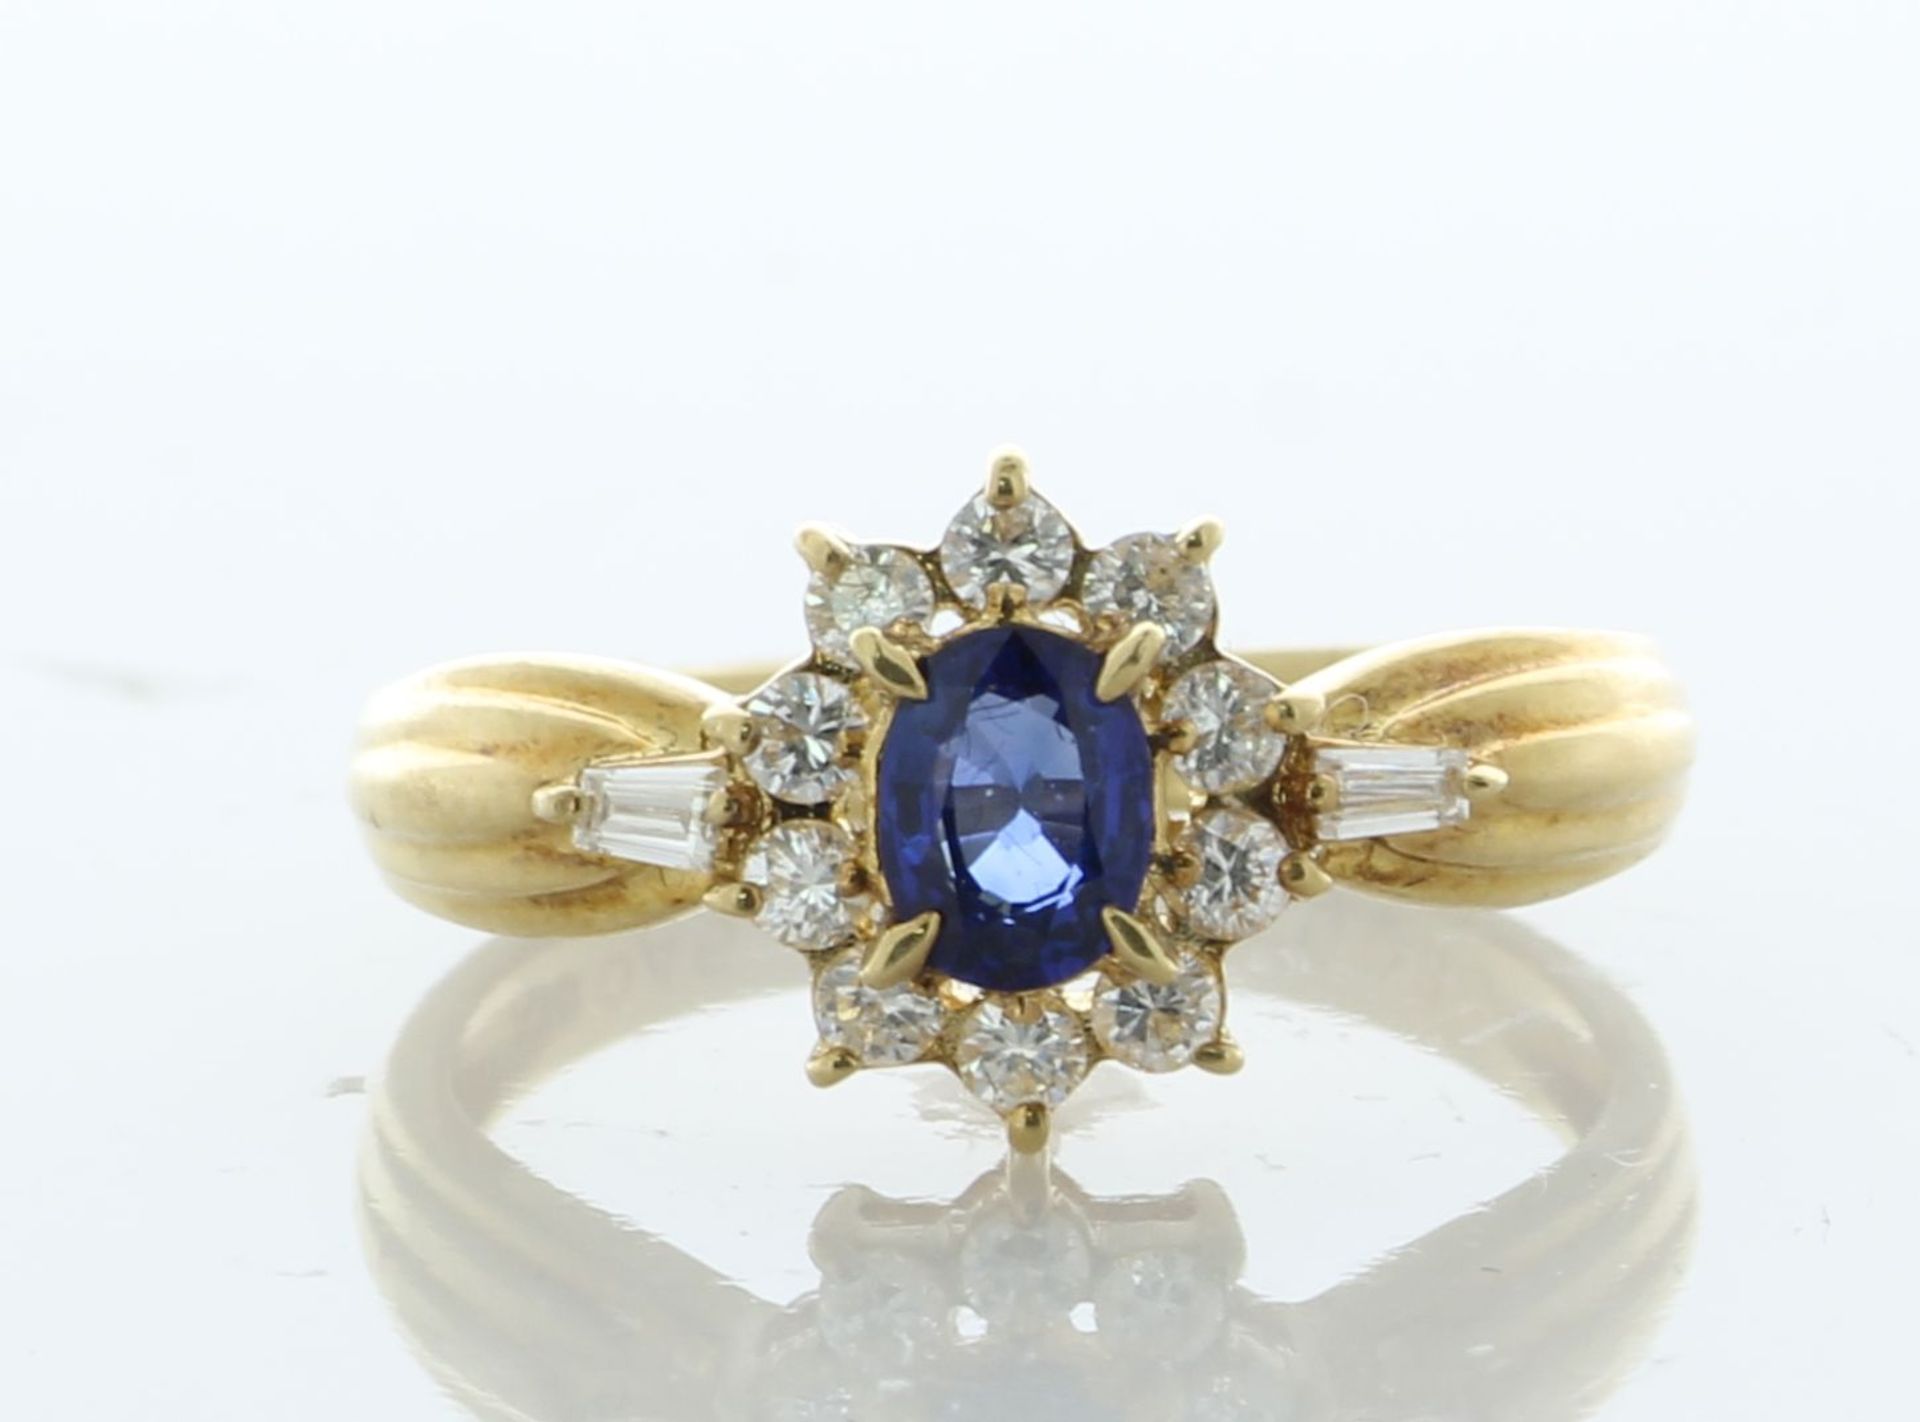 18ct Yellow Gold Oval Cut Sapphire And Diamond Ring (S0.45) 0.30 Carats - Valued By IDI £5,950. - Image 3 of 5